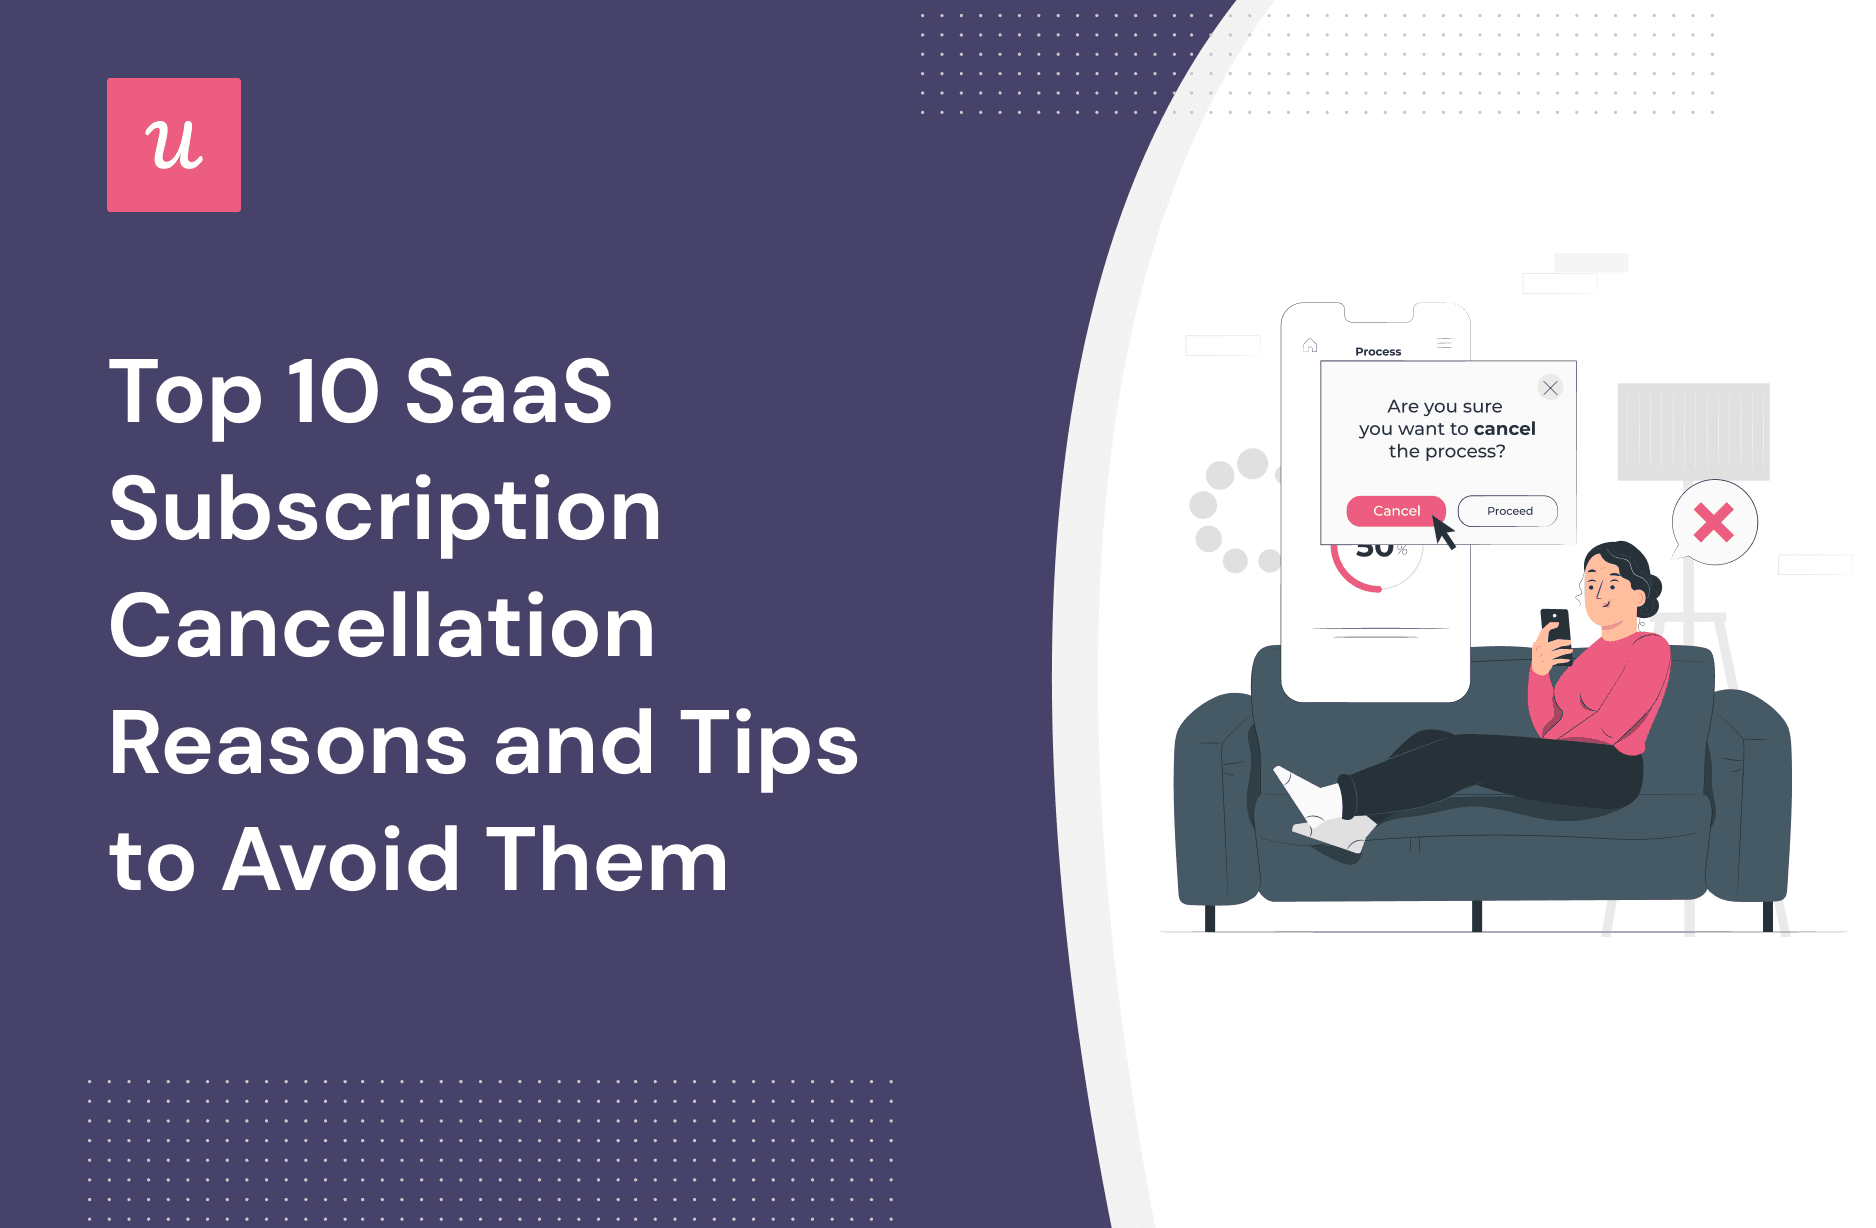 Top 10 SaaS Subscription Cancellation Reasons and Tips to Avoid Them cover